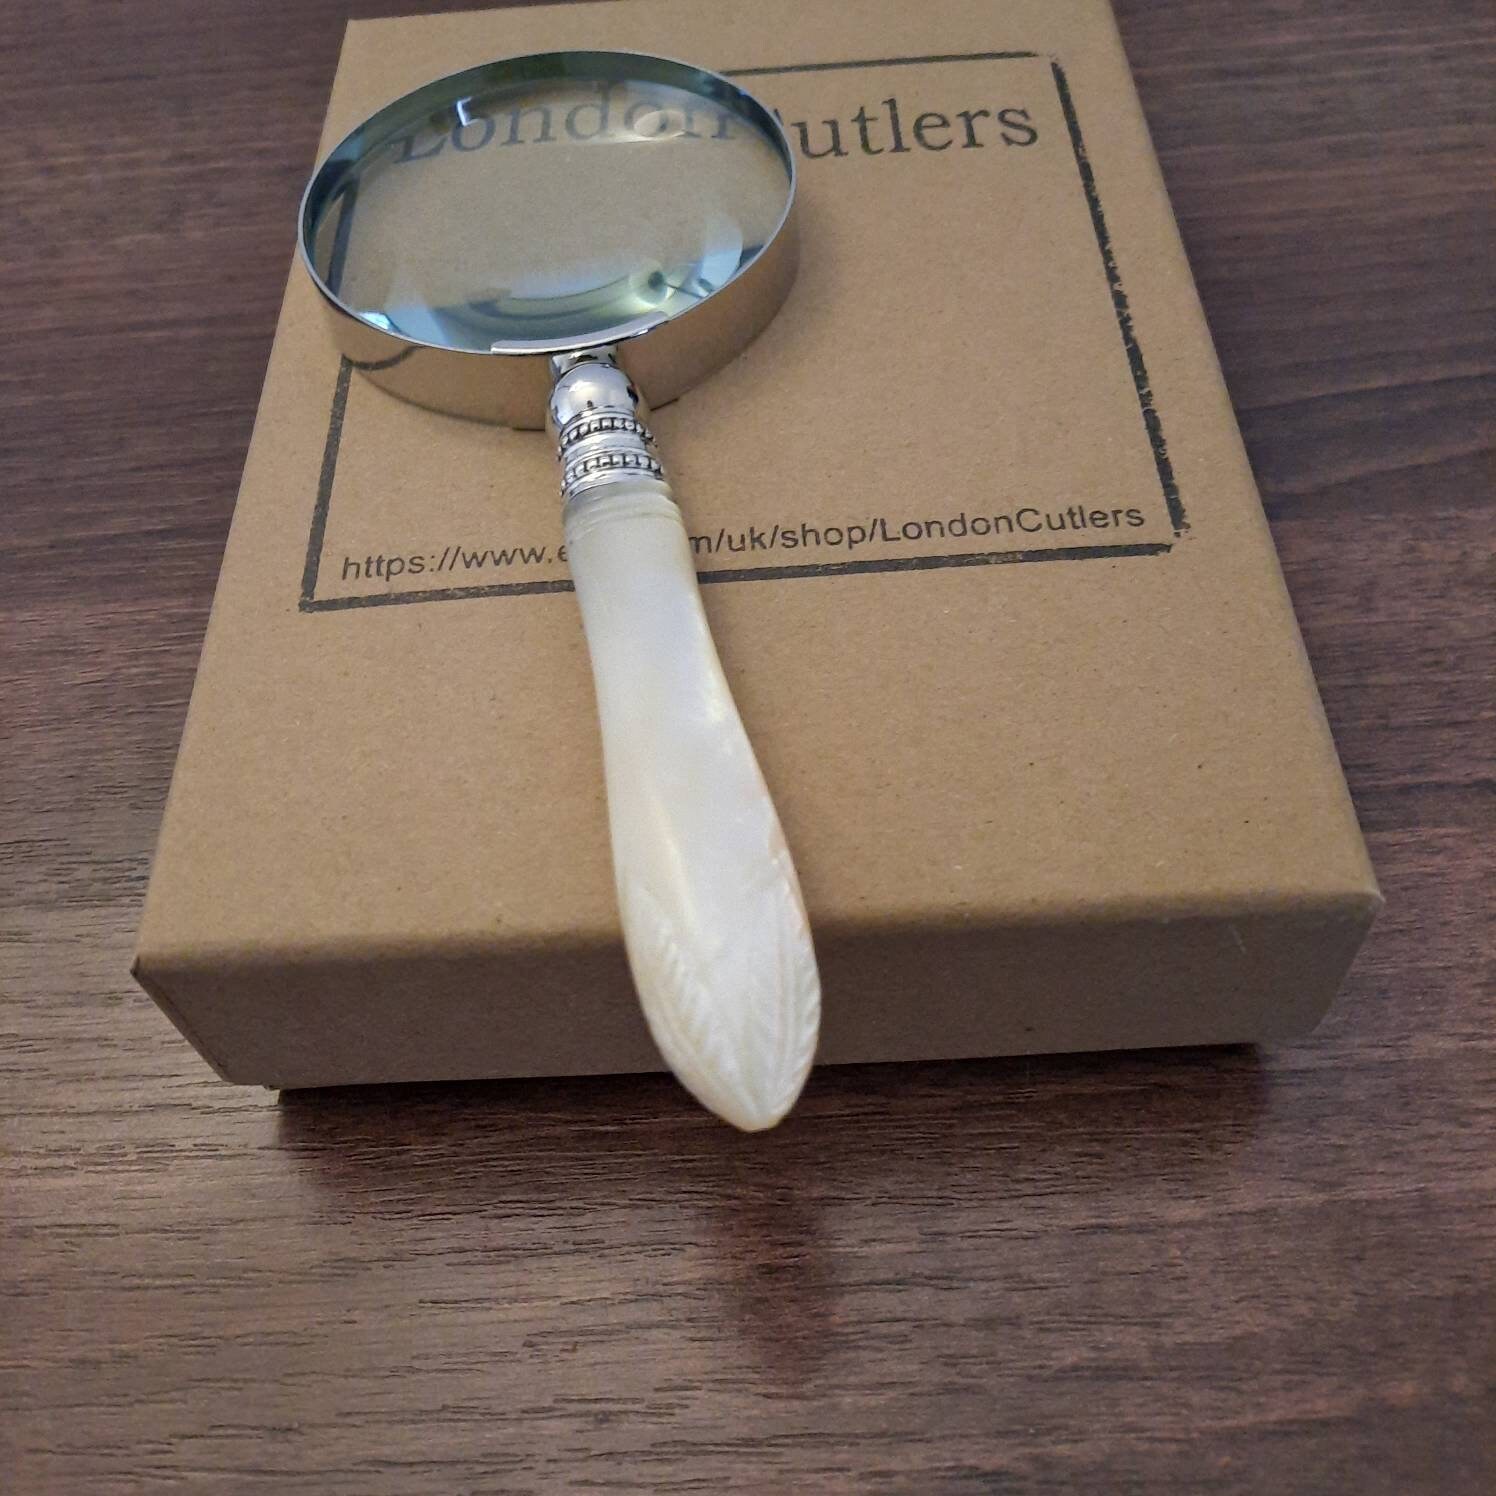 Small Magnifying Glass Chunky Mother of Pearl Handle Vintage Recycled  Antique Cutlery Magnifier With Glass Lens Great Gifts by Londoncutlers 